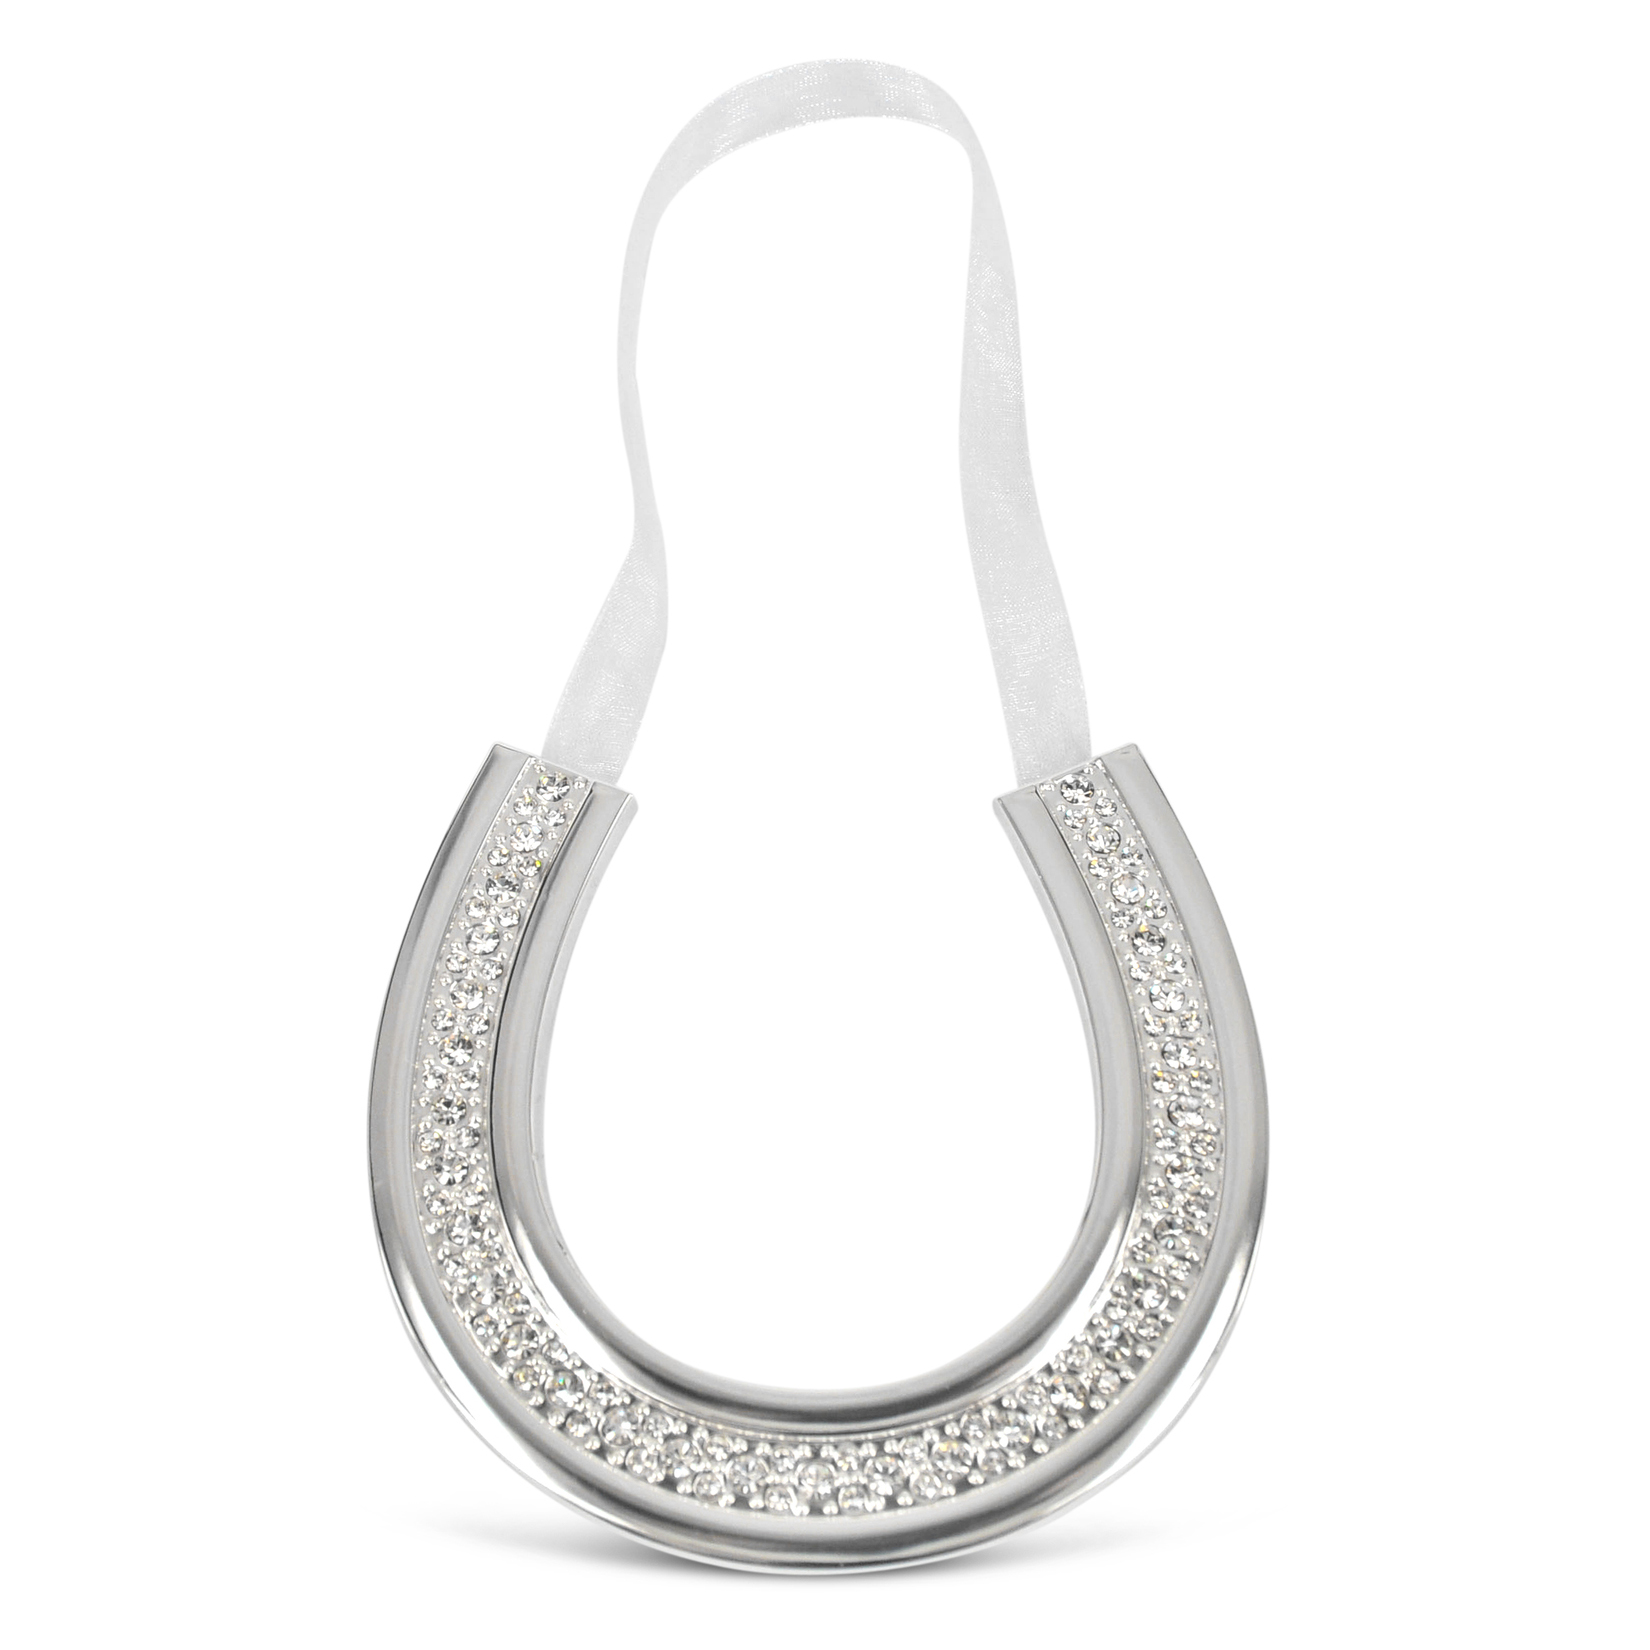 Horse hoof hanger w/clear crystals